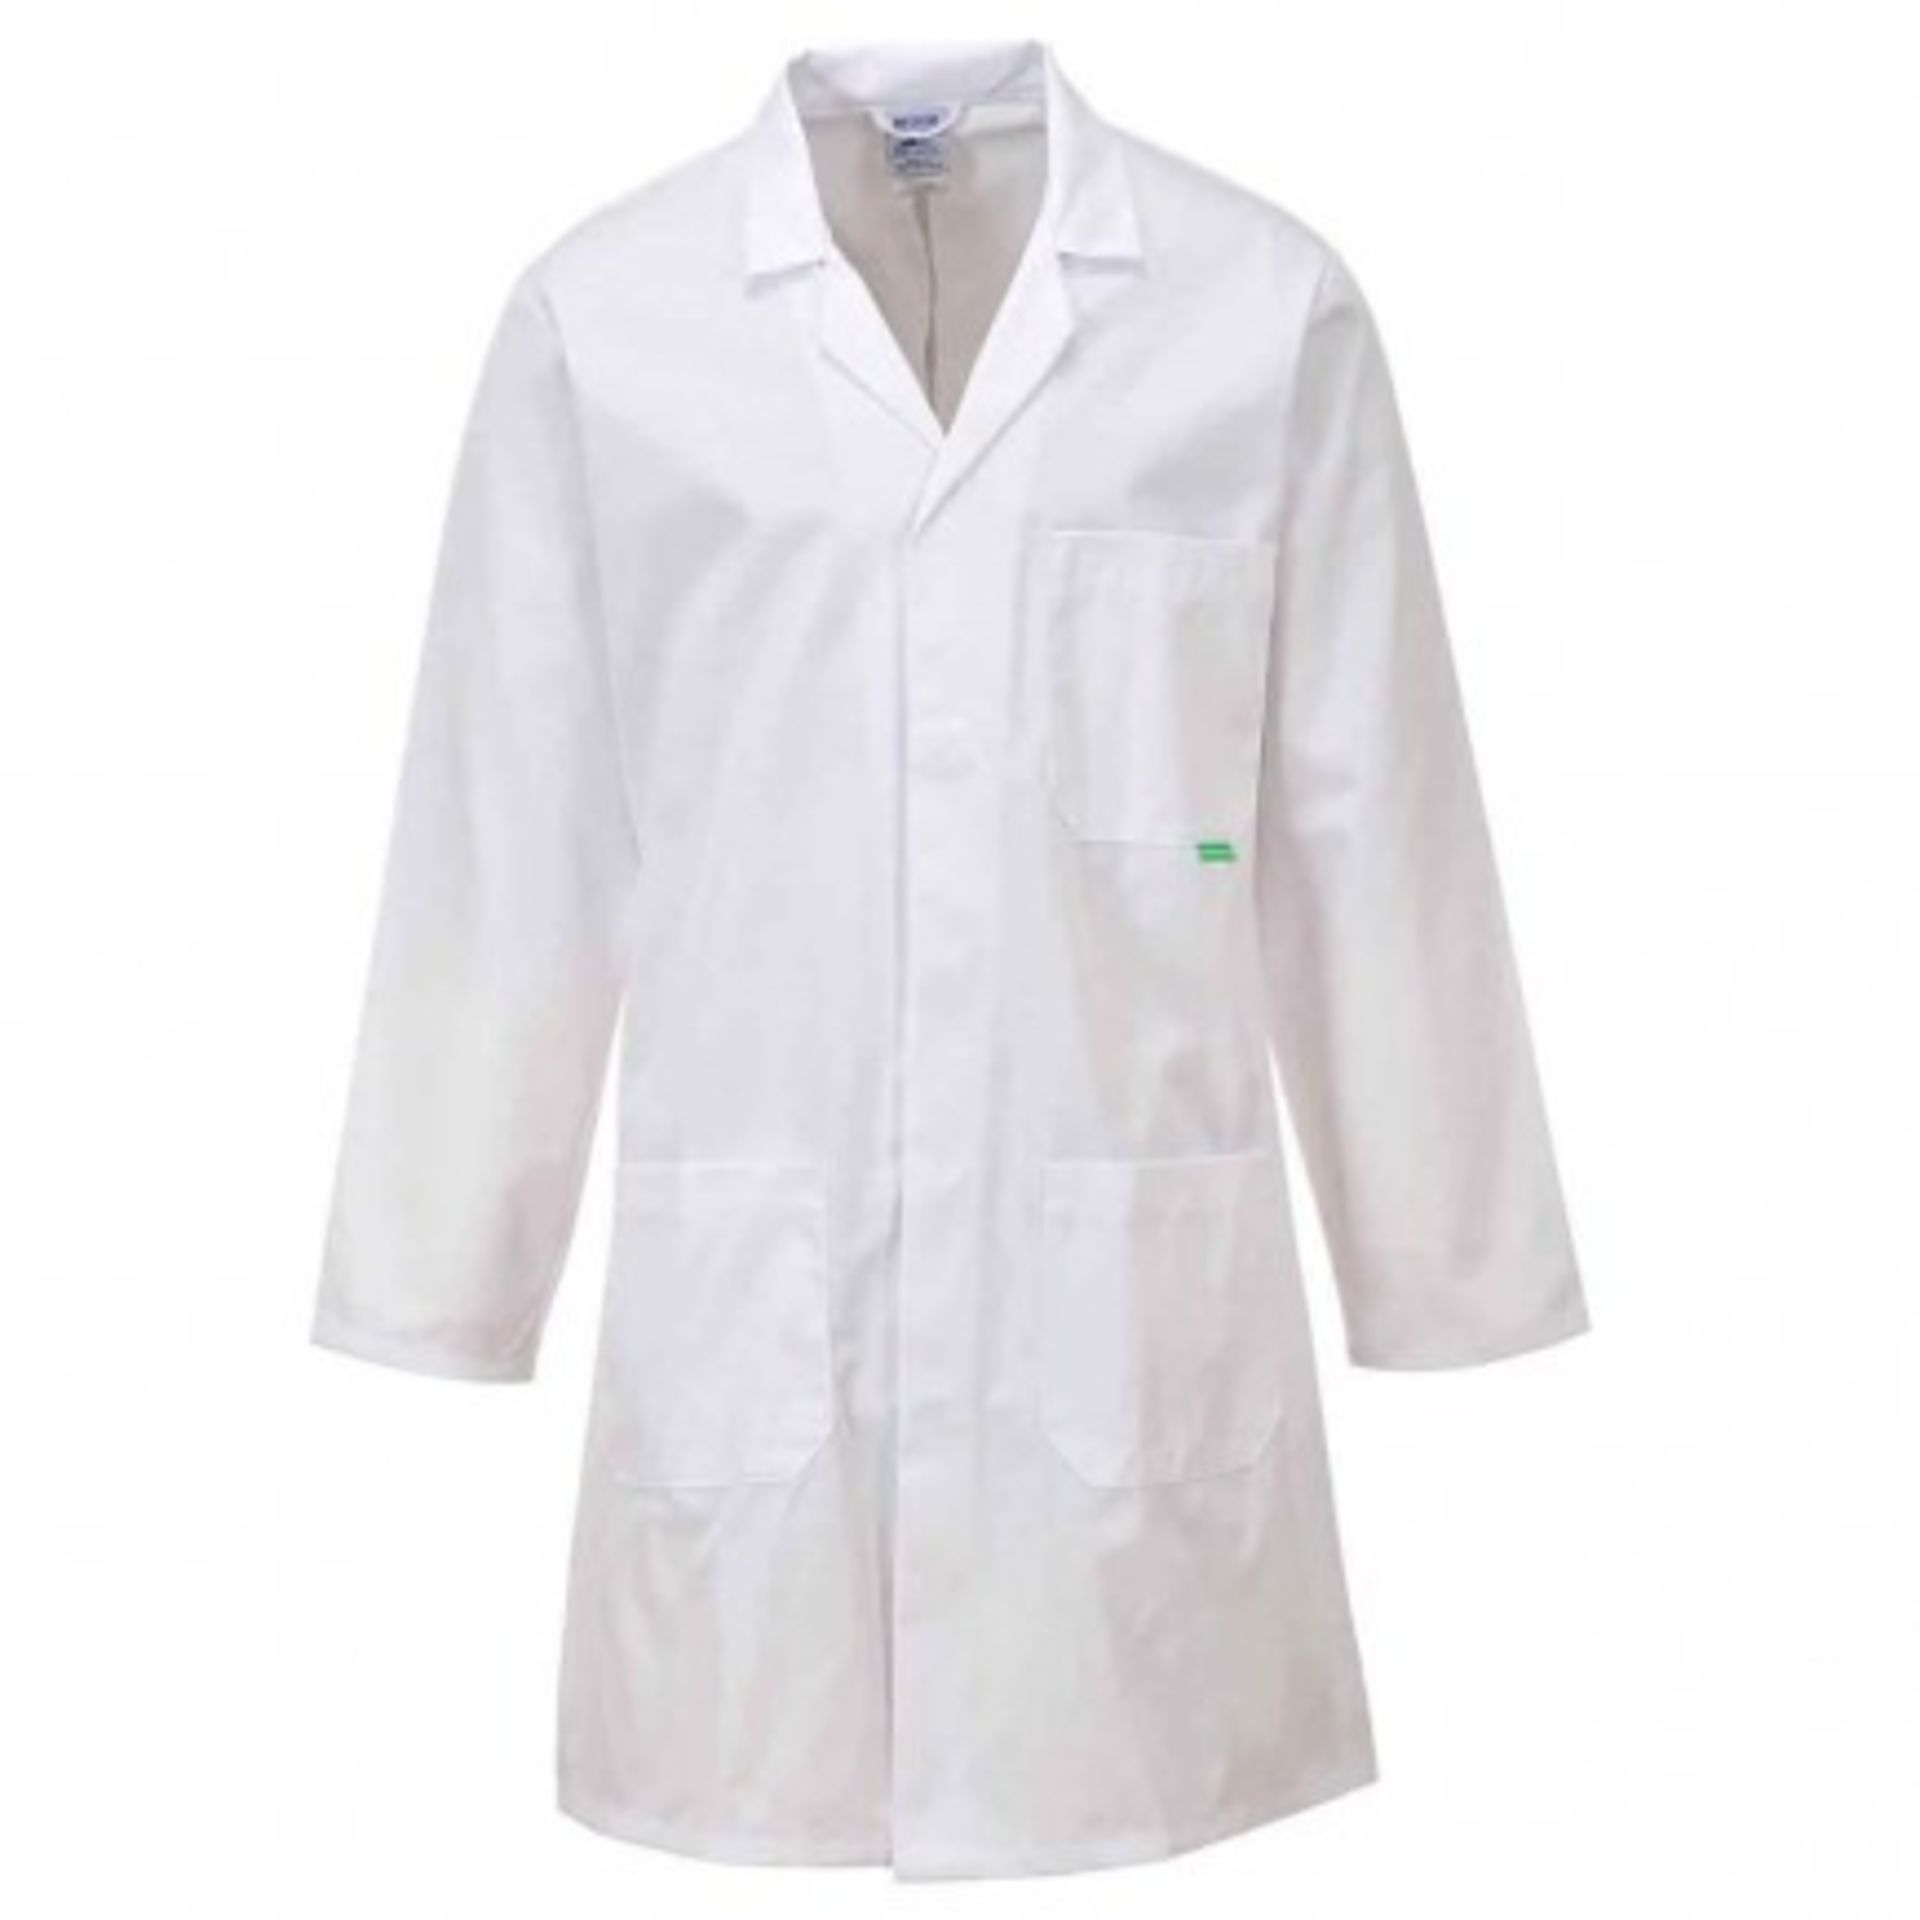 Brand New Portwest 24x White Anti-Microbial Lab Coat - Small RRP £15.75 Each (R52)